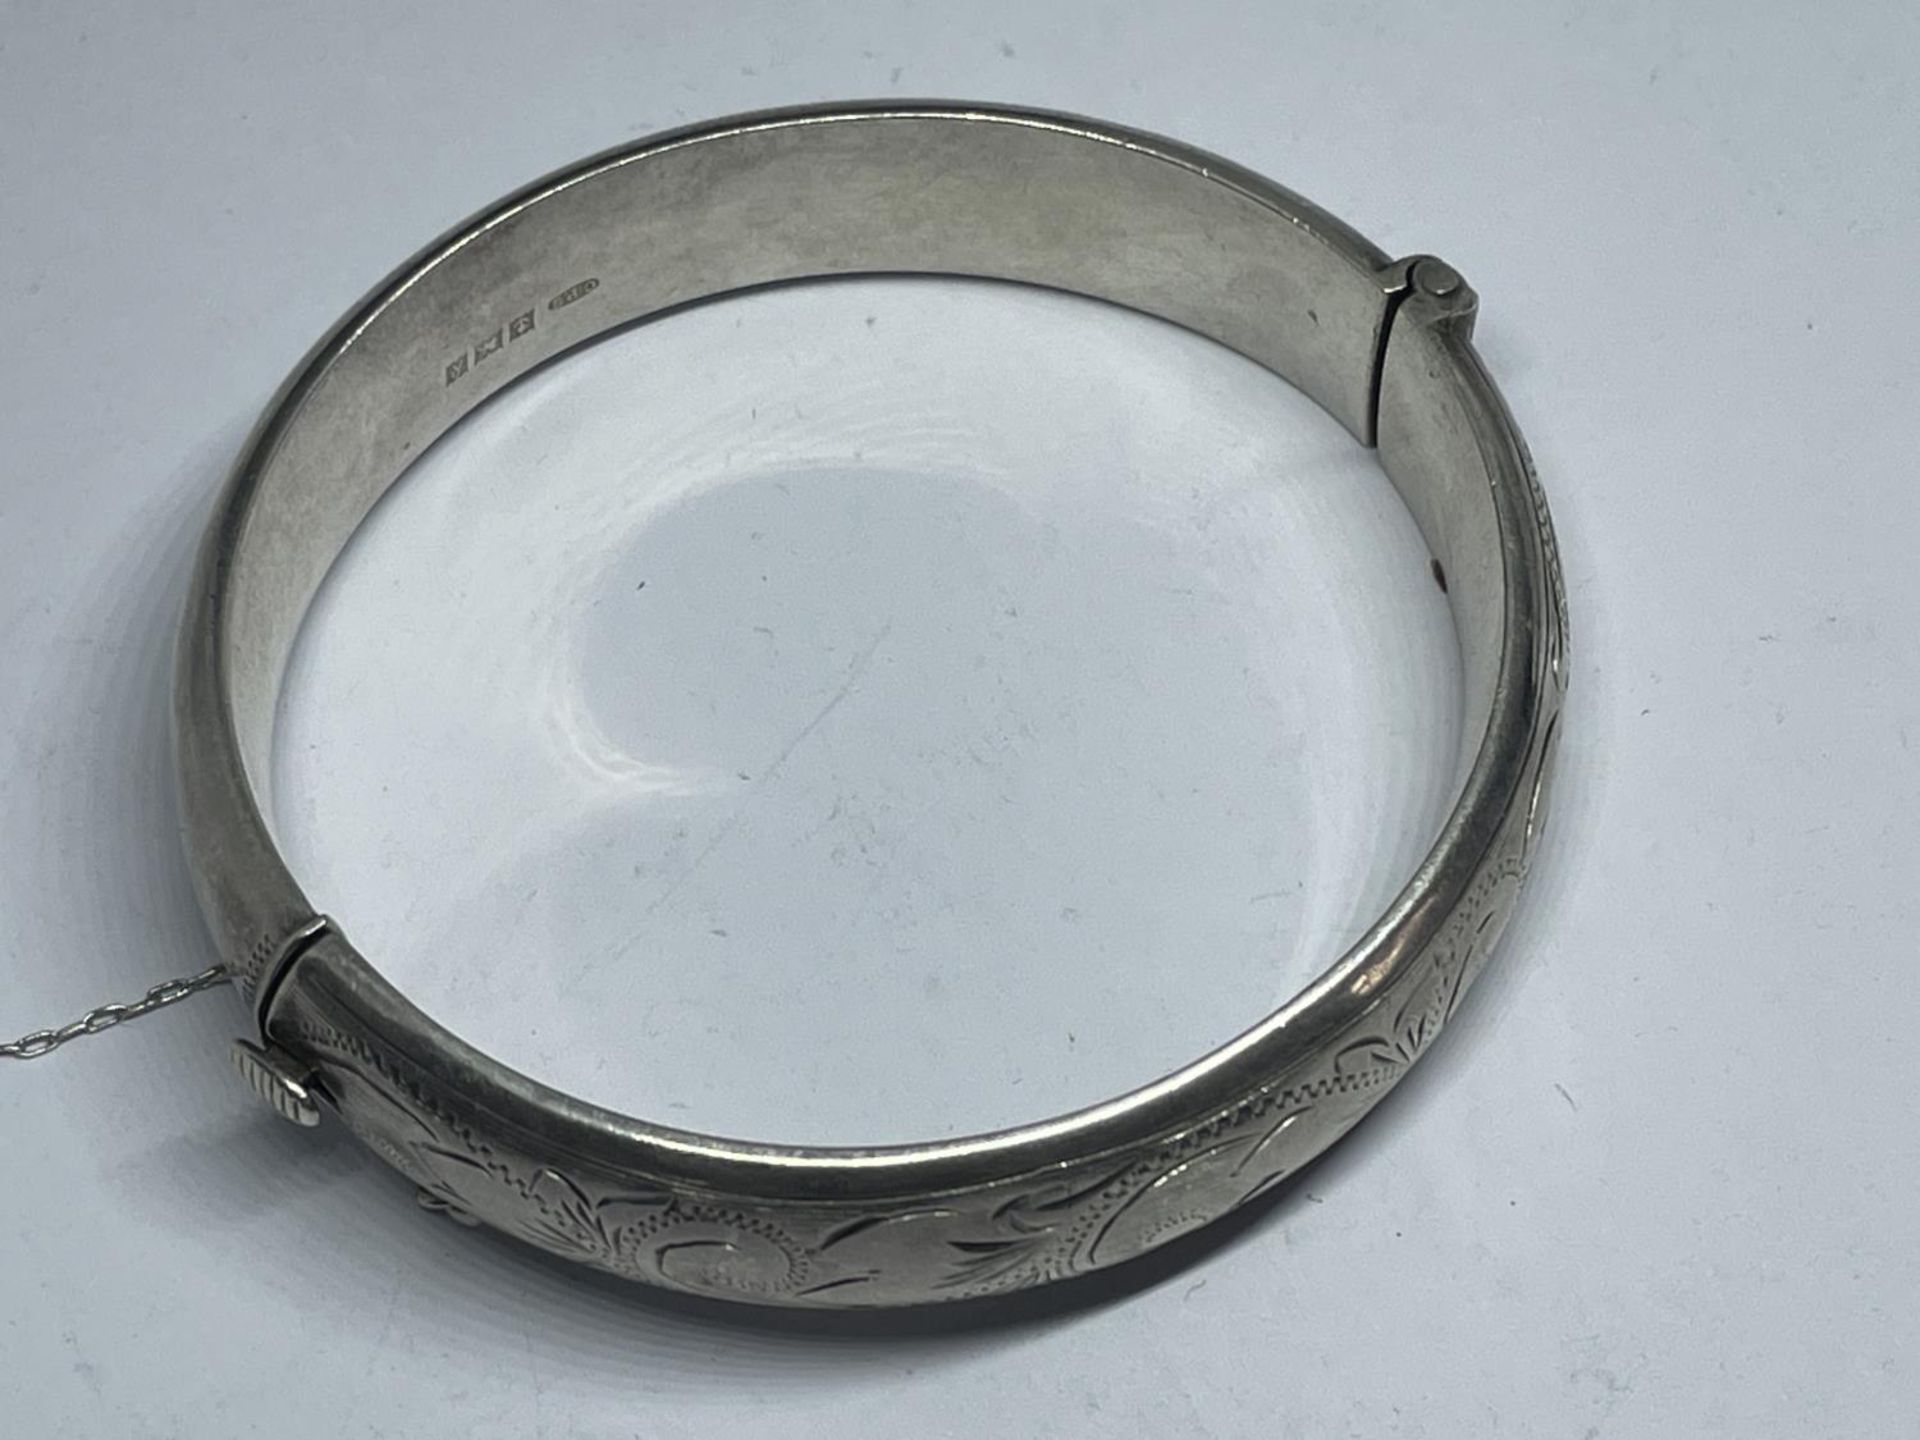 A HALLMARKED BIRMINGHAM SILVER BANGLE WEIGHT 21.3 GRAMS - Image 3 of 4